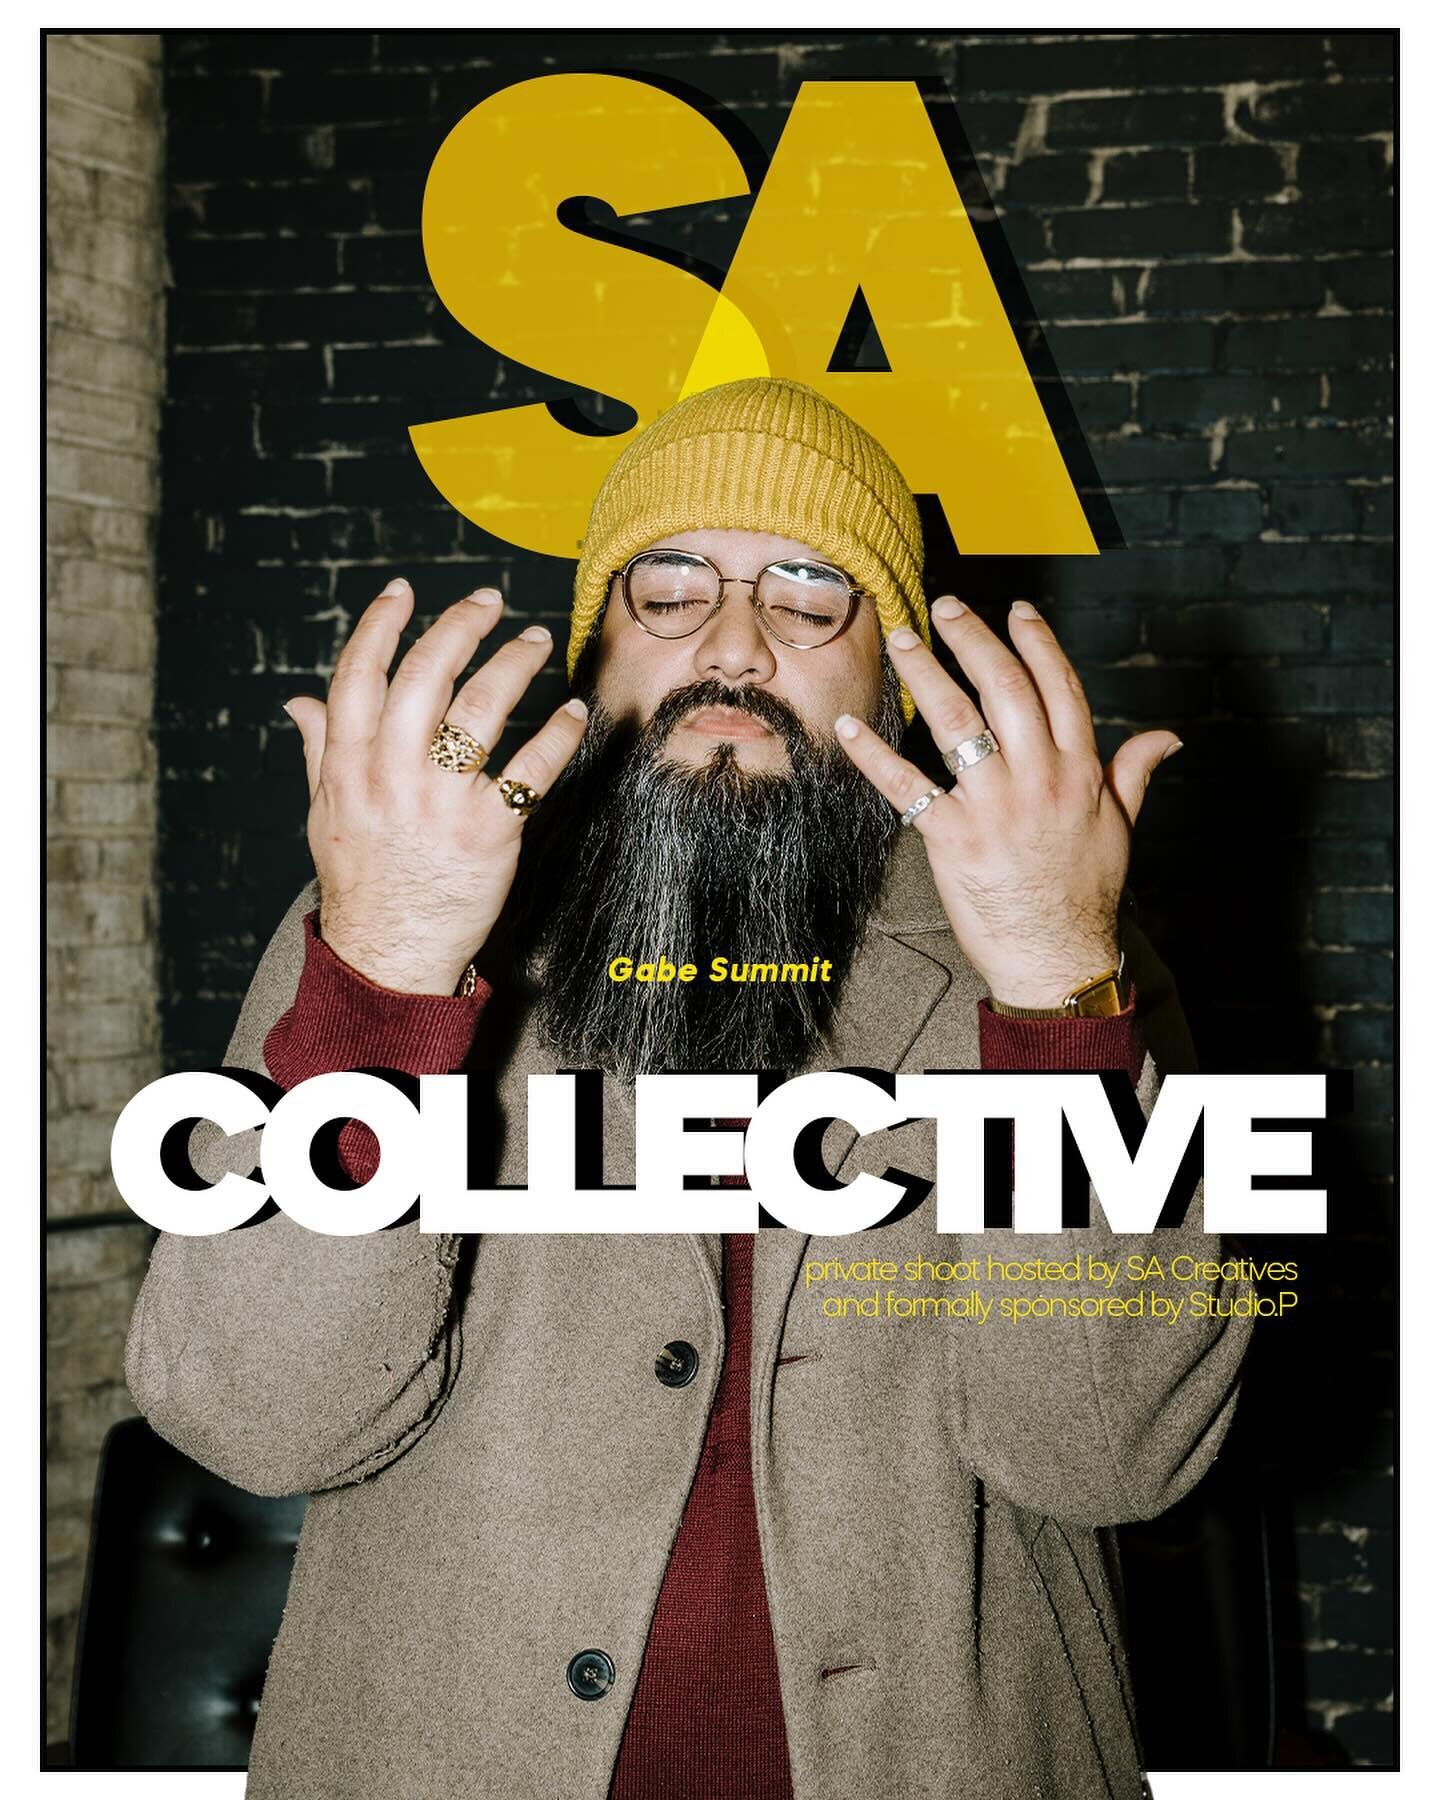 One of my last creative shoots with SA Creatives was an invite-only expedition shoot launching their new member&rsquo;s program &ldquo;The Collective&rdquo; more info on their website (@sa.creatives)

Shoutout to everyone in this shoot and to @studio